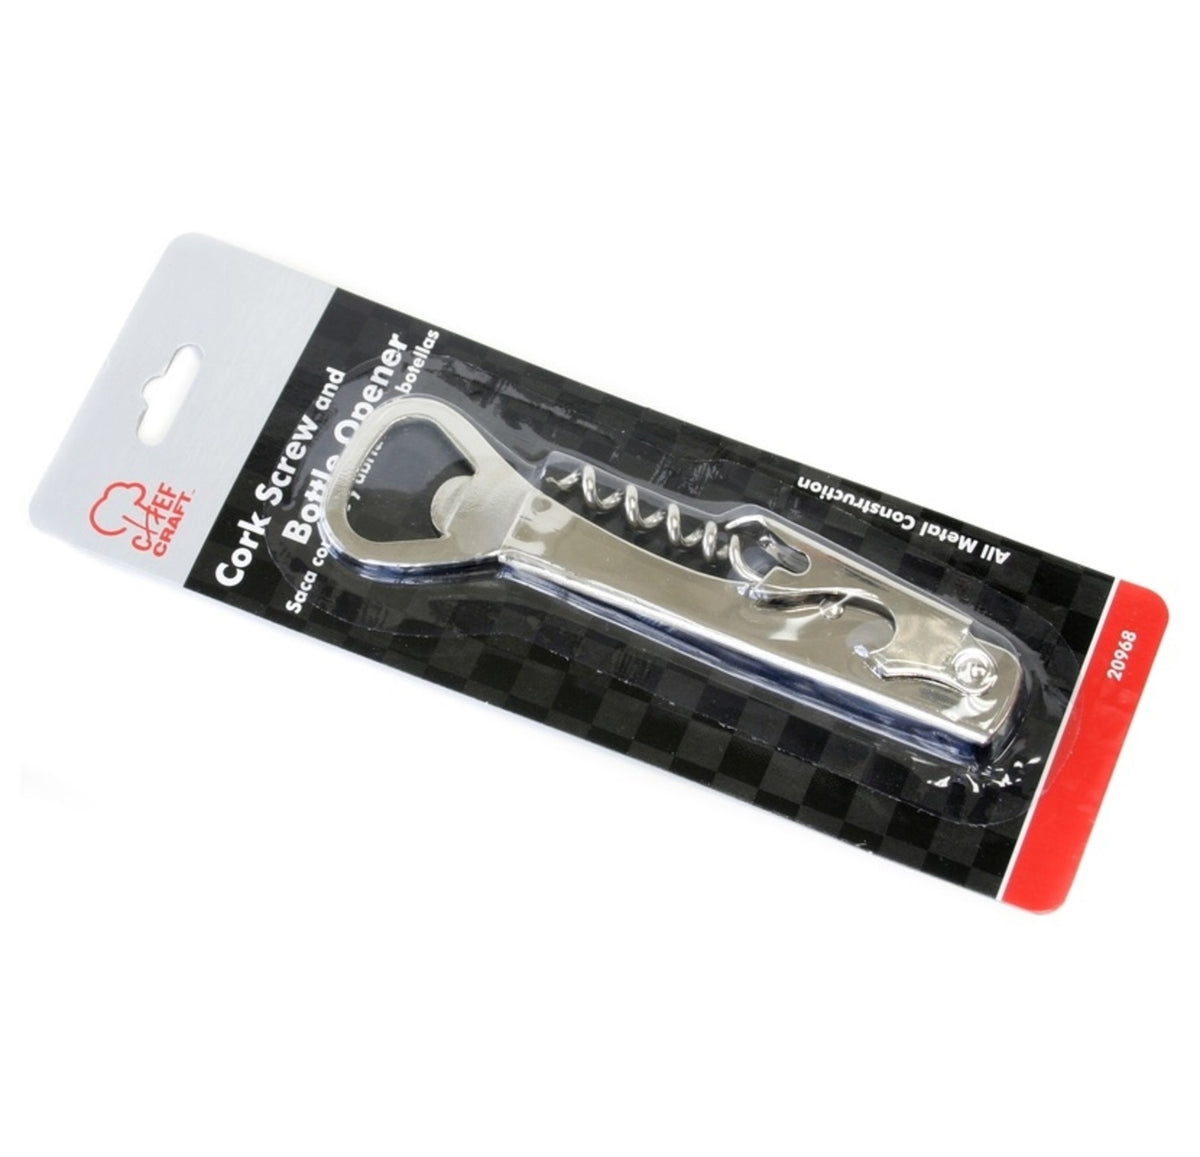 Chef Craft 20968 Corkscrew And Bottle Opener, Silver Color